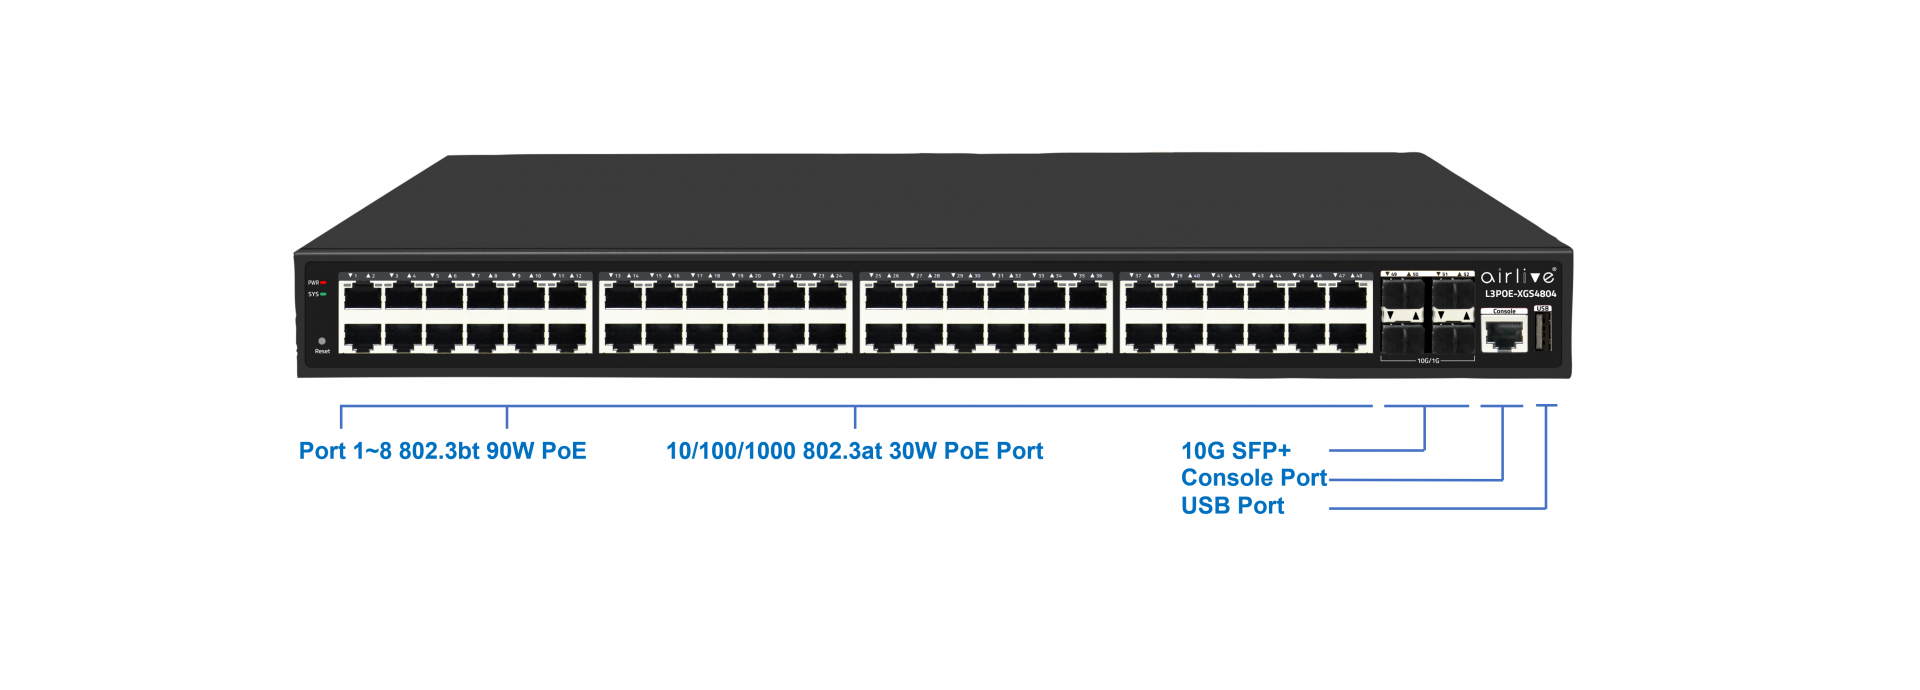 Managed 8 RJ45 10gb Layer 3 Switch With Web-Based / GUI / CLI / SNMP  Management